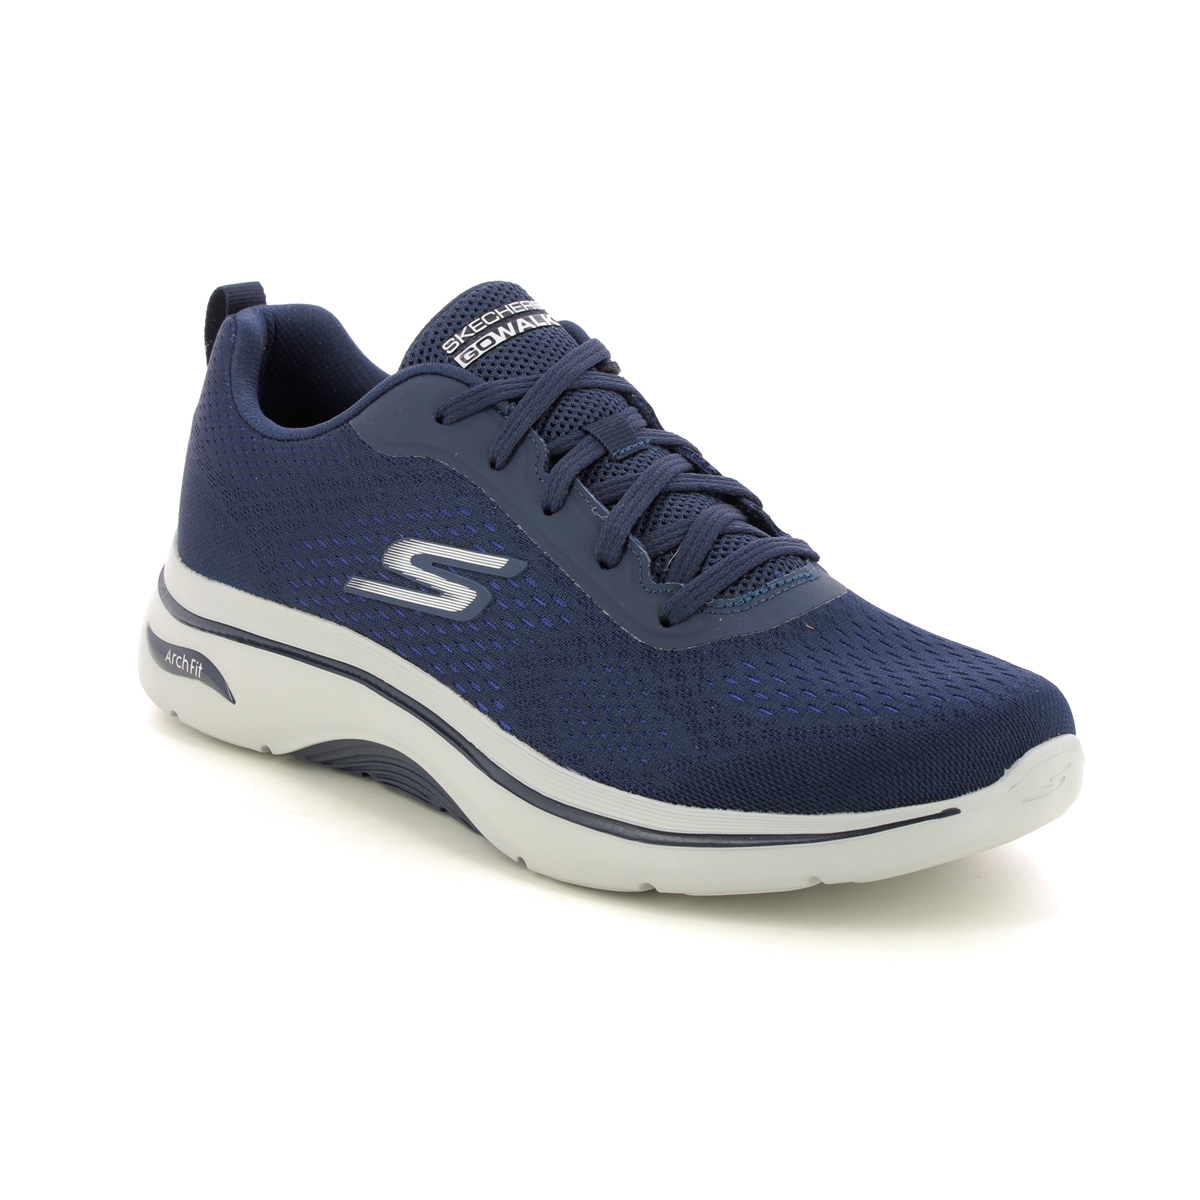 Skechers Arch Fit 2 Go Walk 7 NVY Navy Mens trainers 216516 in a Plain Textile in Size 12